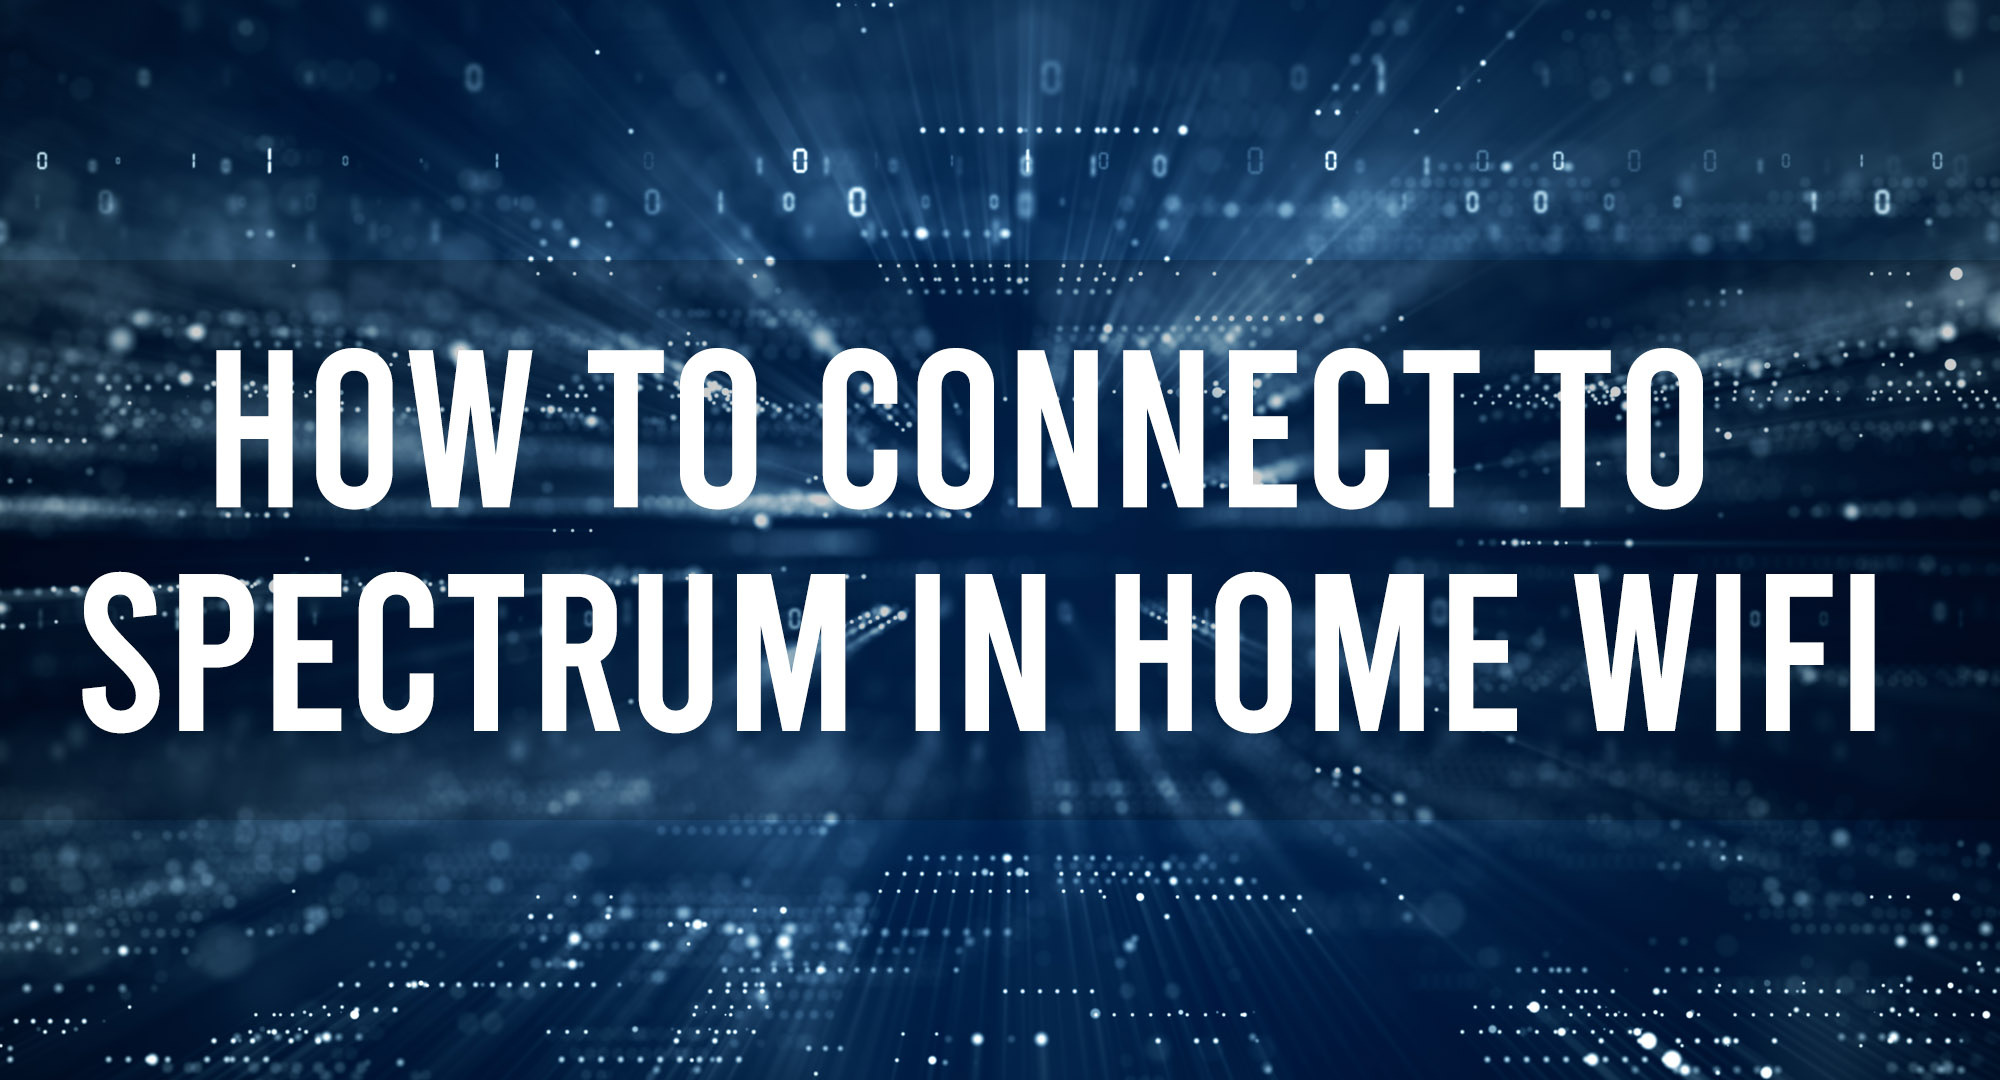 How to connect to spectrum in home WIFI